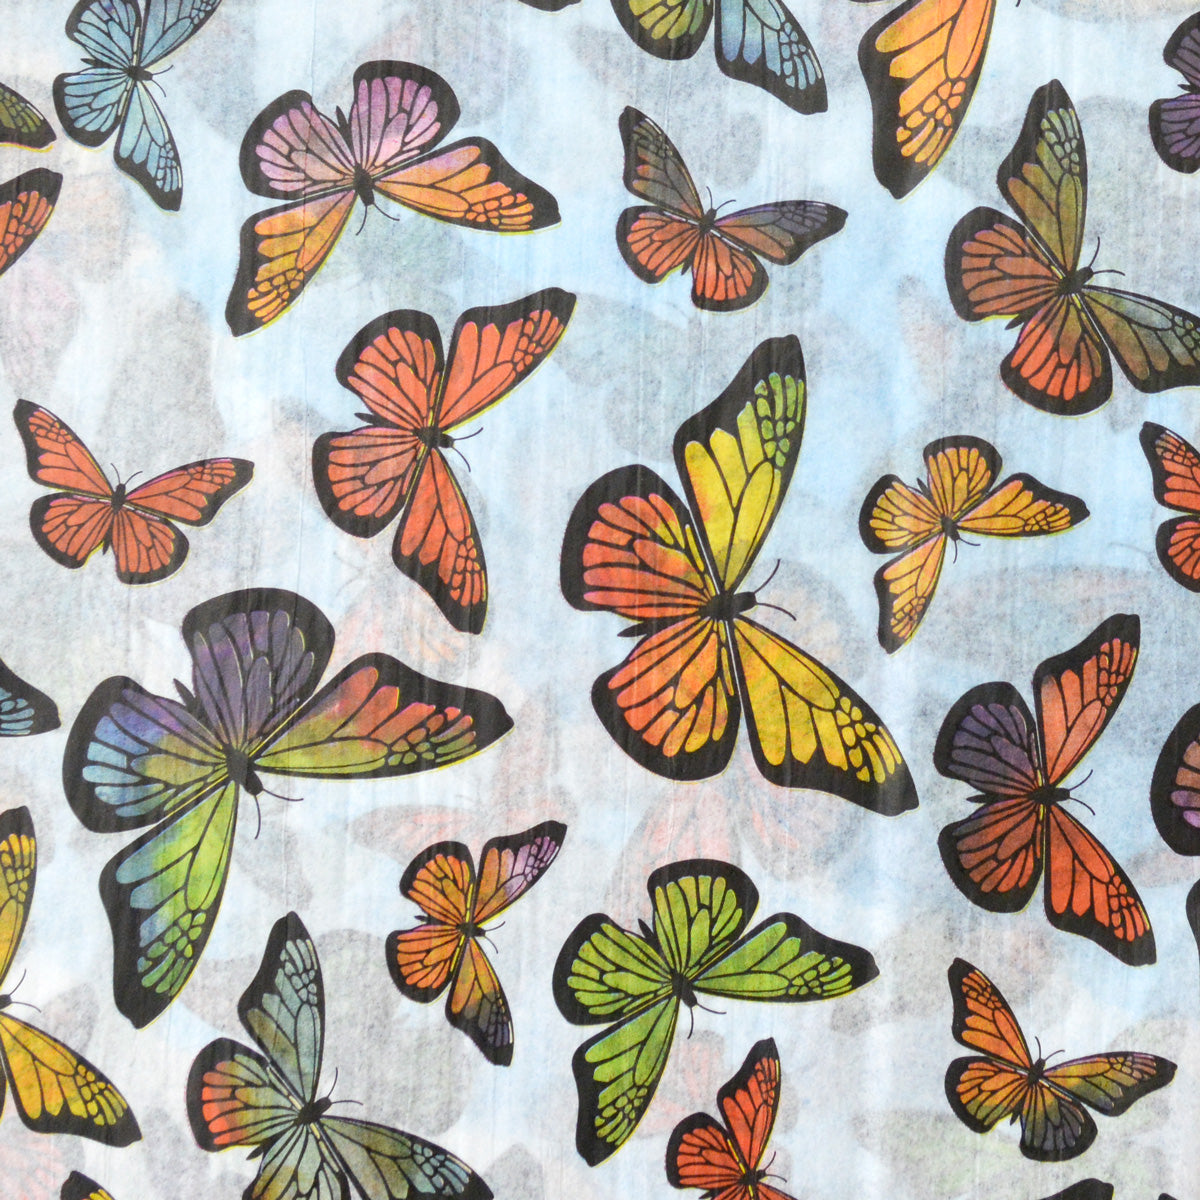 Butterflies Tissue Paper - Butterfly Pattern Paper, Christmas Gift Wrapping for Girls, Holiday Wrap Paper, Spring Garden Craft Supplies GenWoo Shop